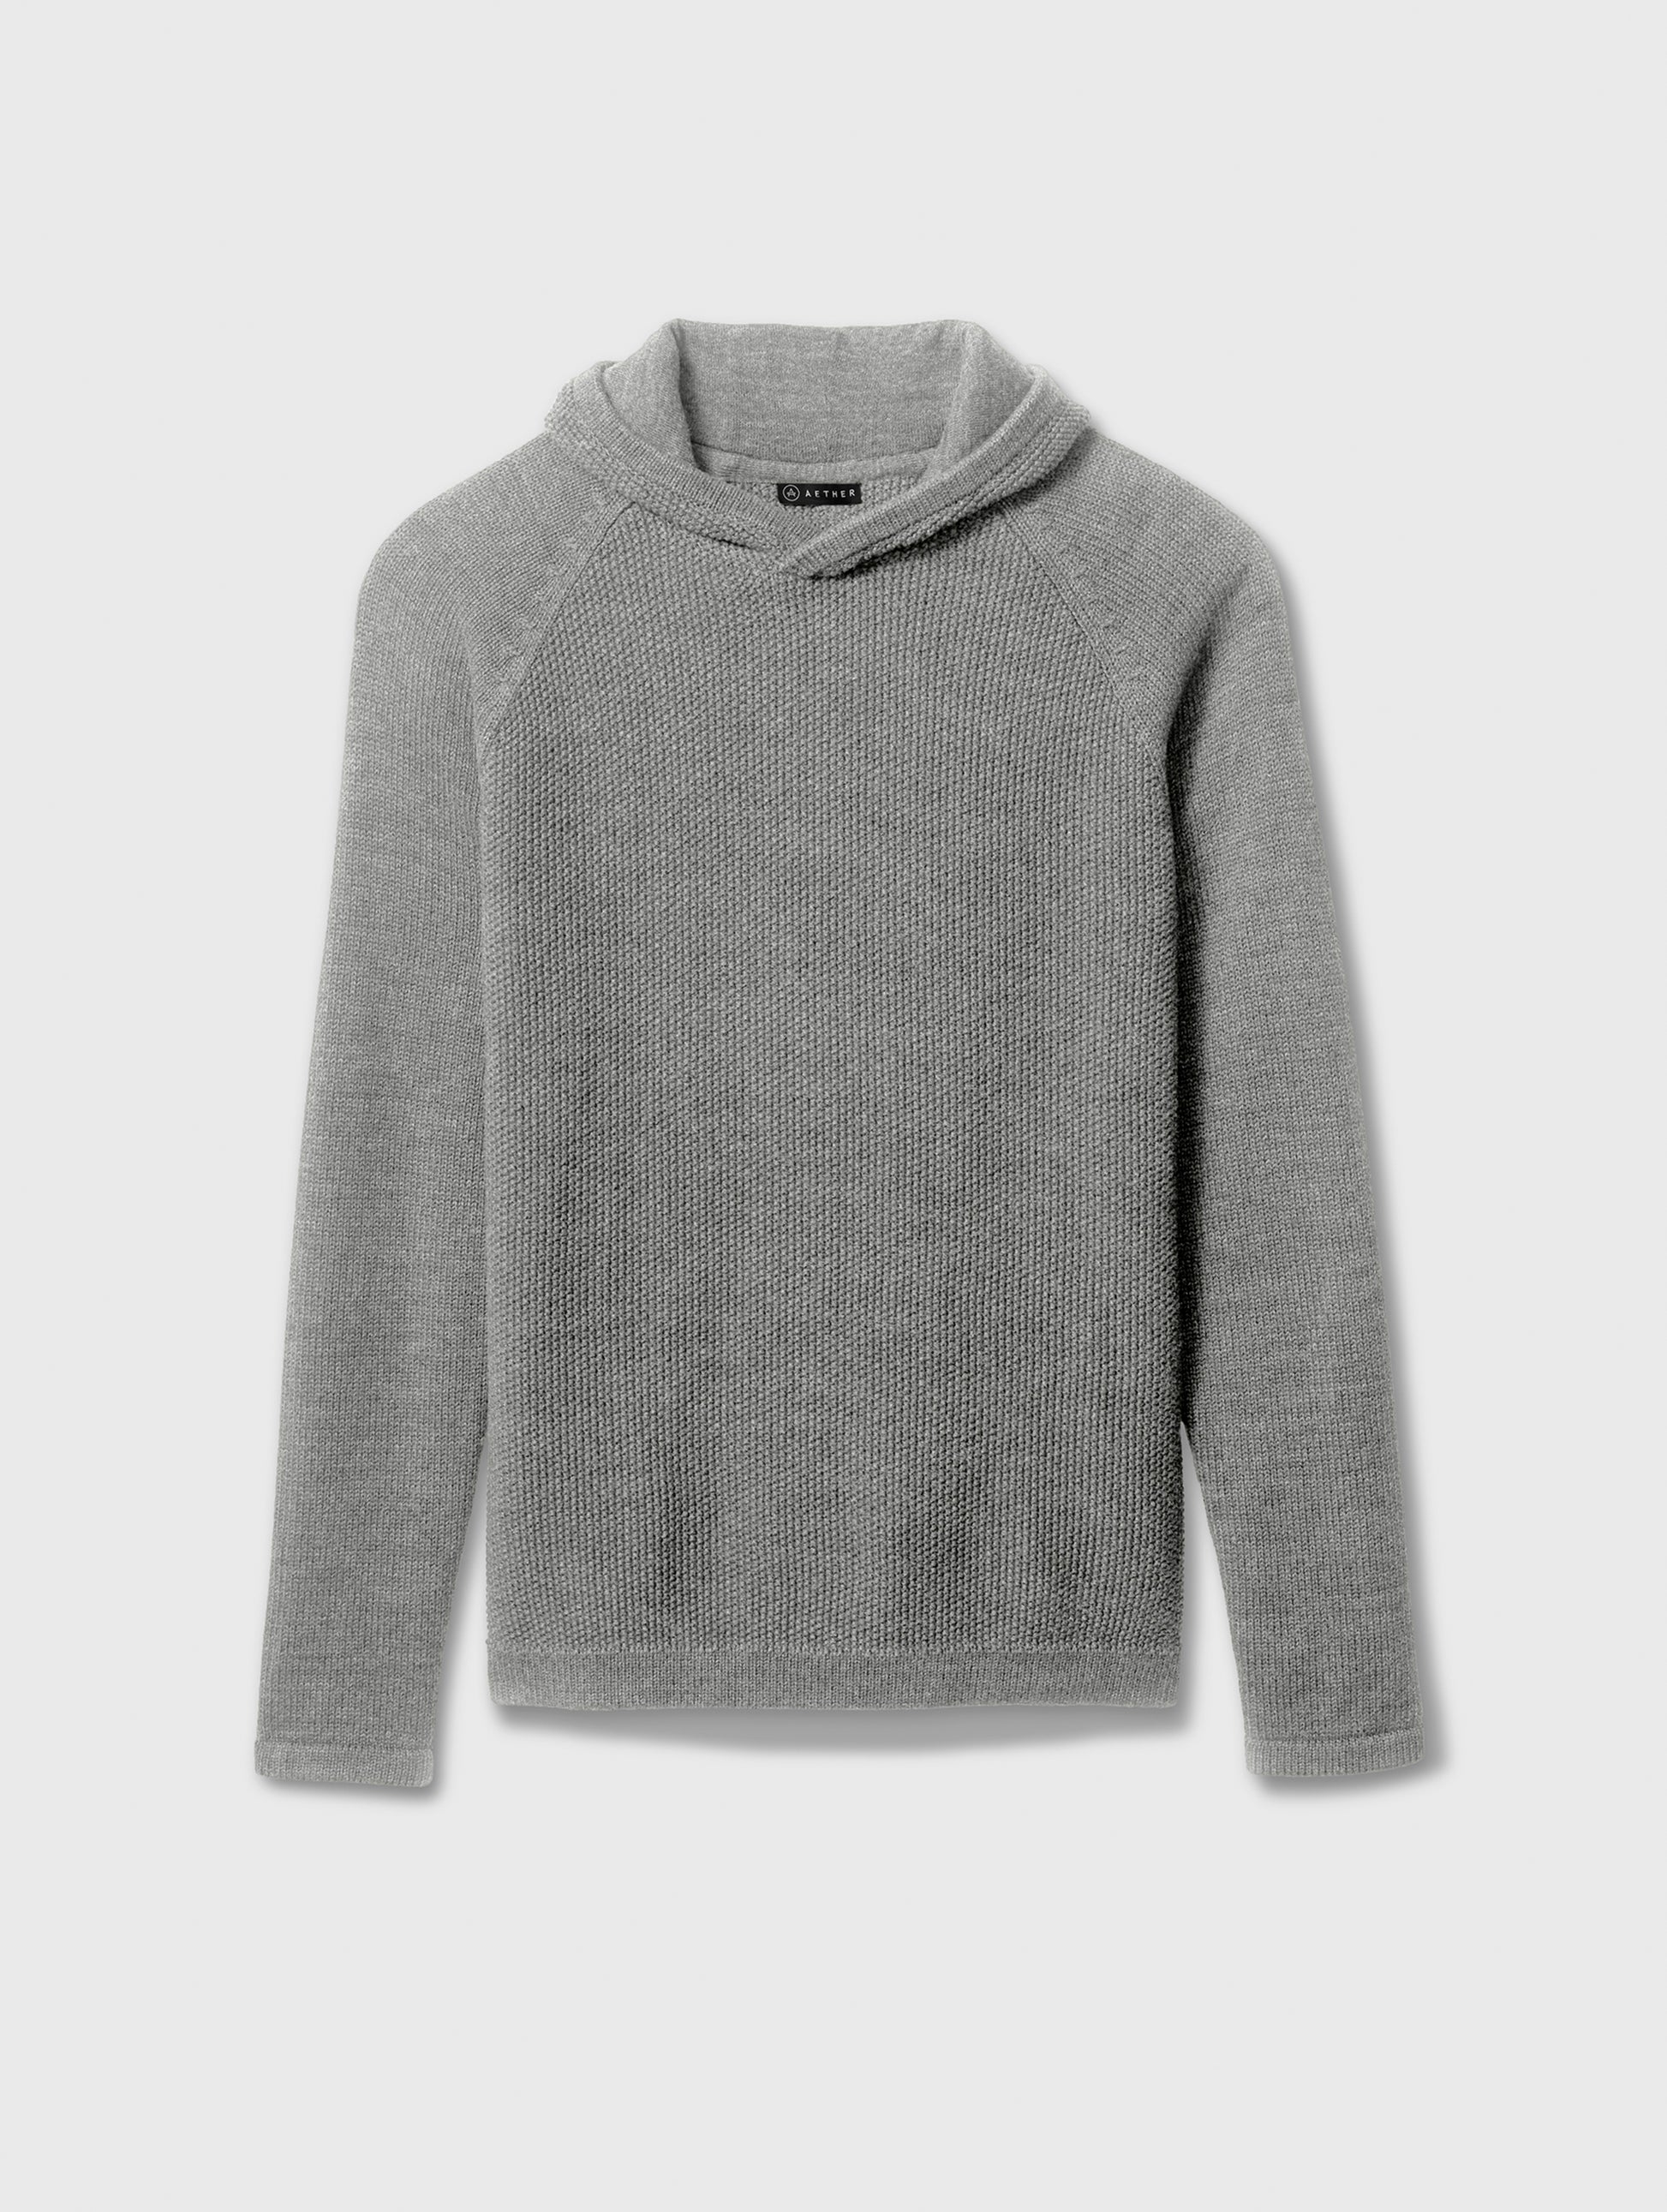 grey hooded sweater for men